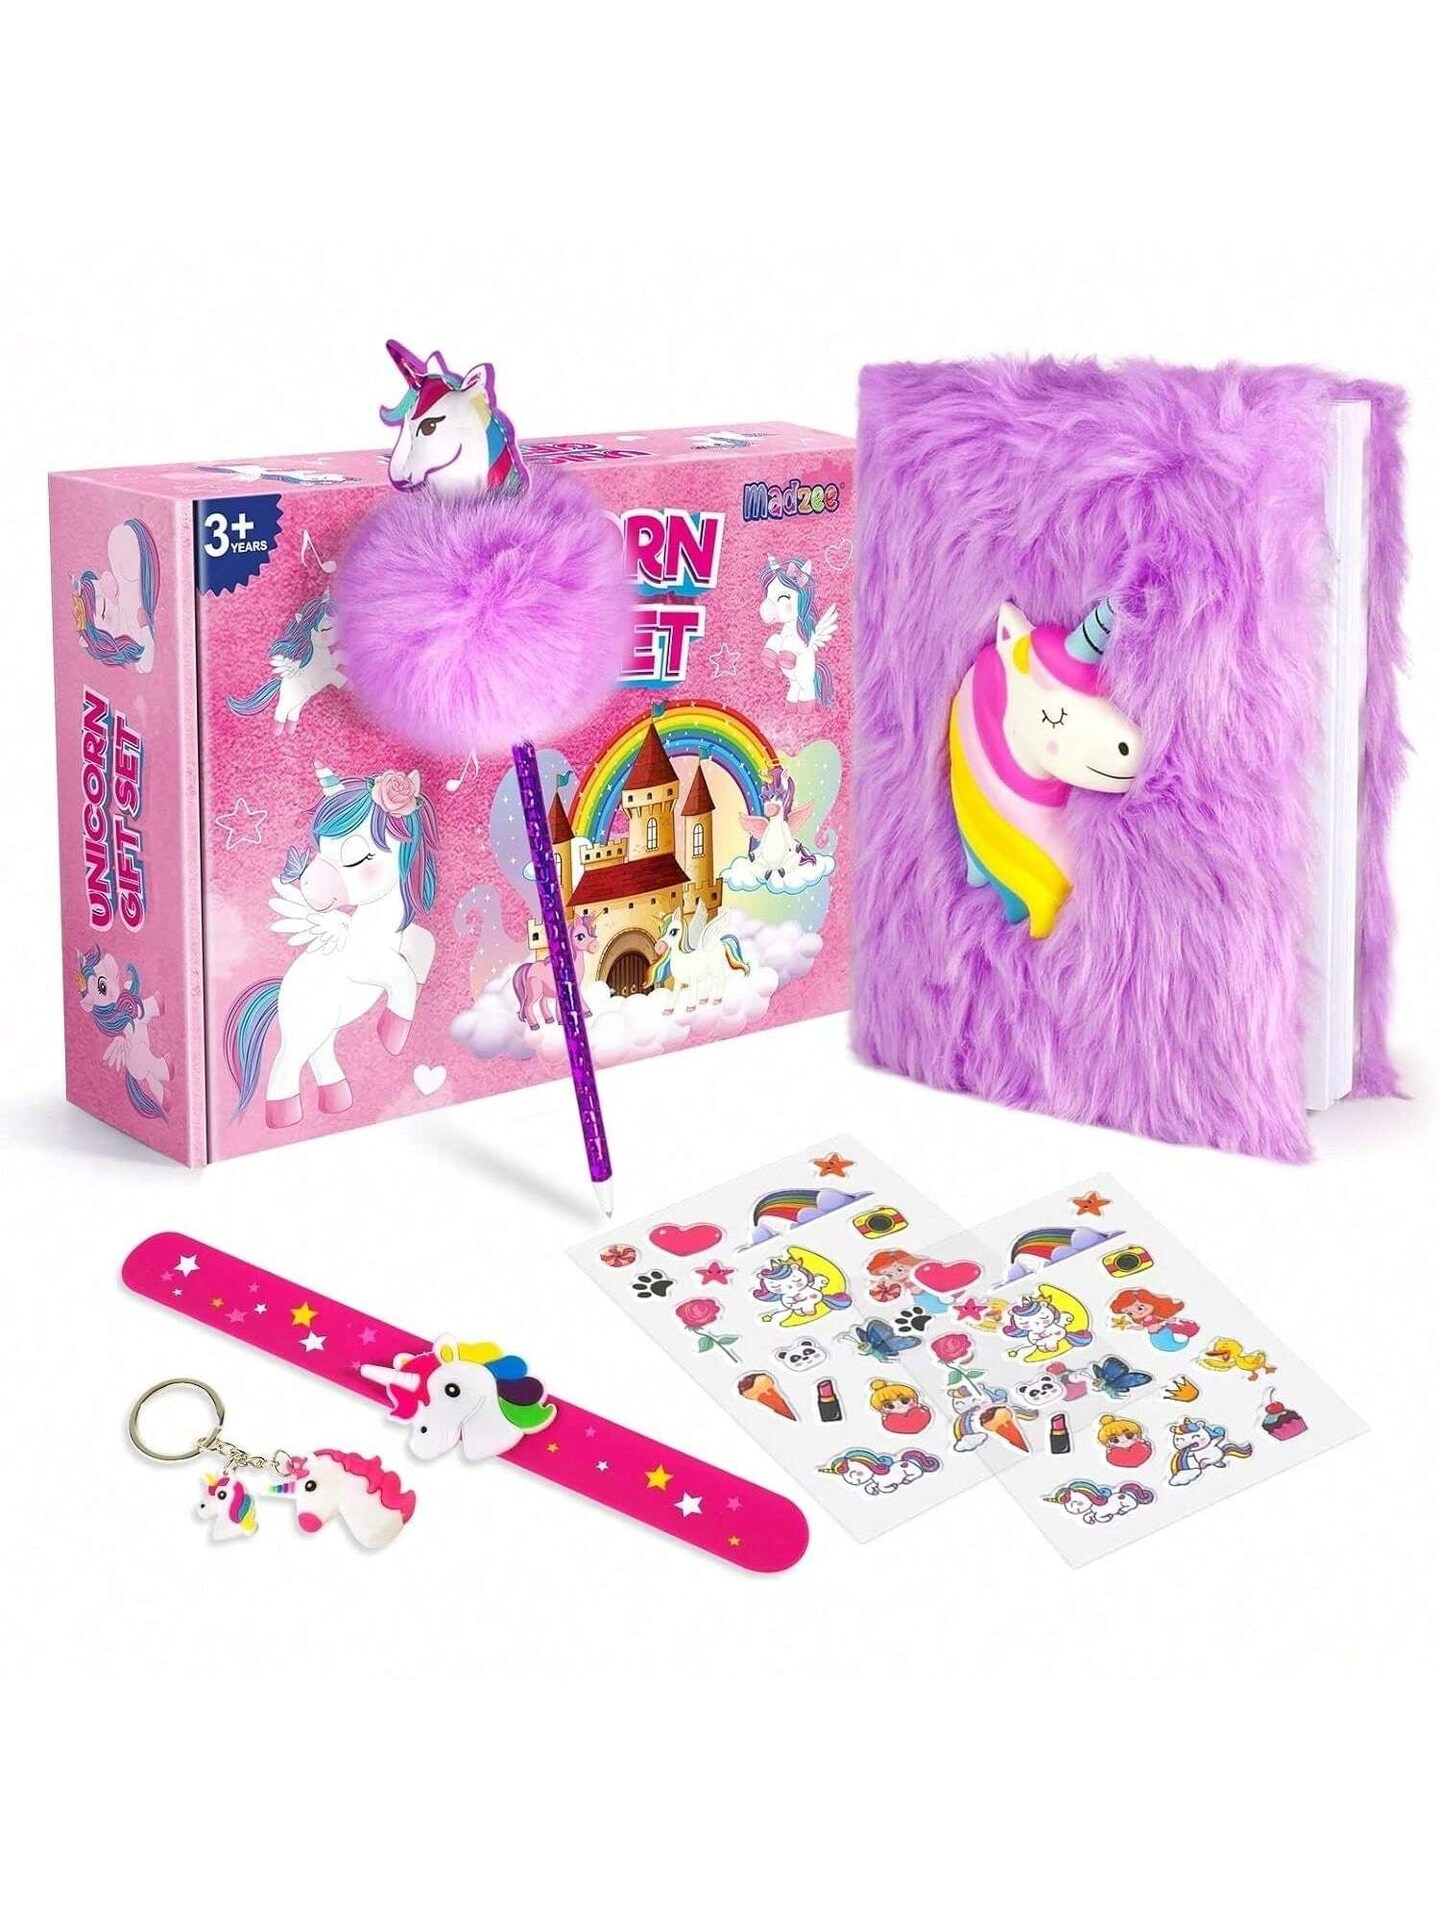 RELIA ONLINE 14 in 1 Unicorn Gift For Girls | Unciorn Theme Gift Item for  Birthday Return Gifts New Pack | Birthday Gift Hamper for kids Age 6-8  Years, 10-12 Years (Assorted